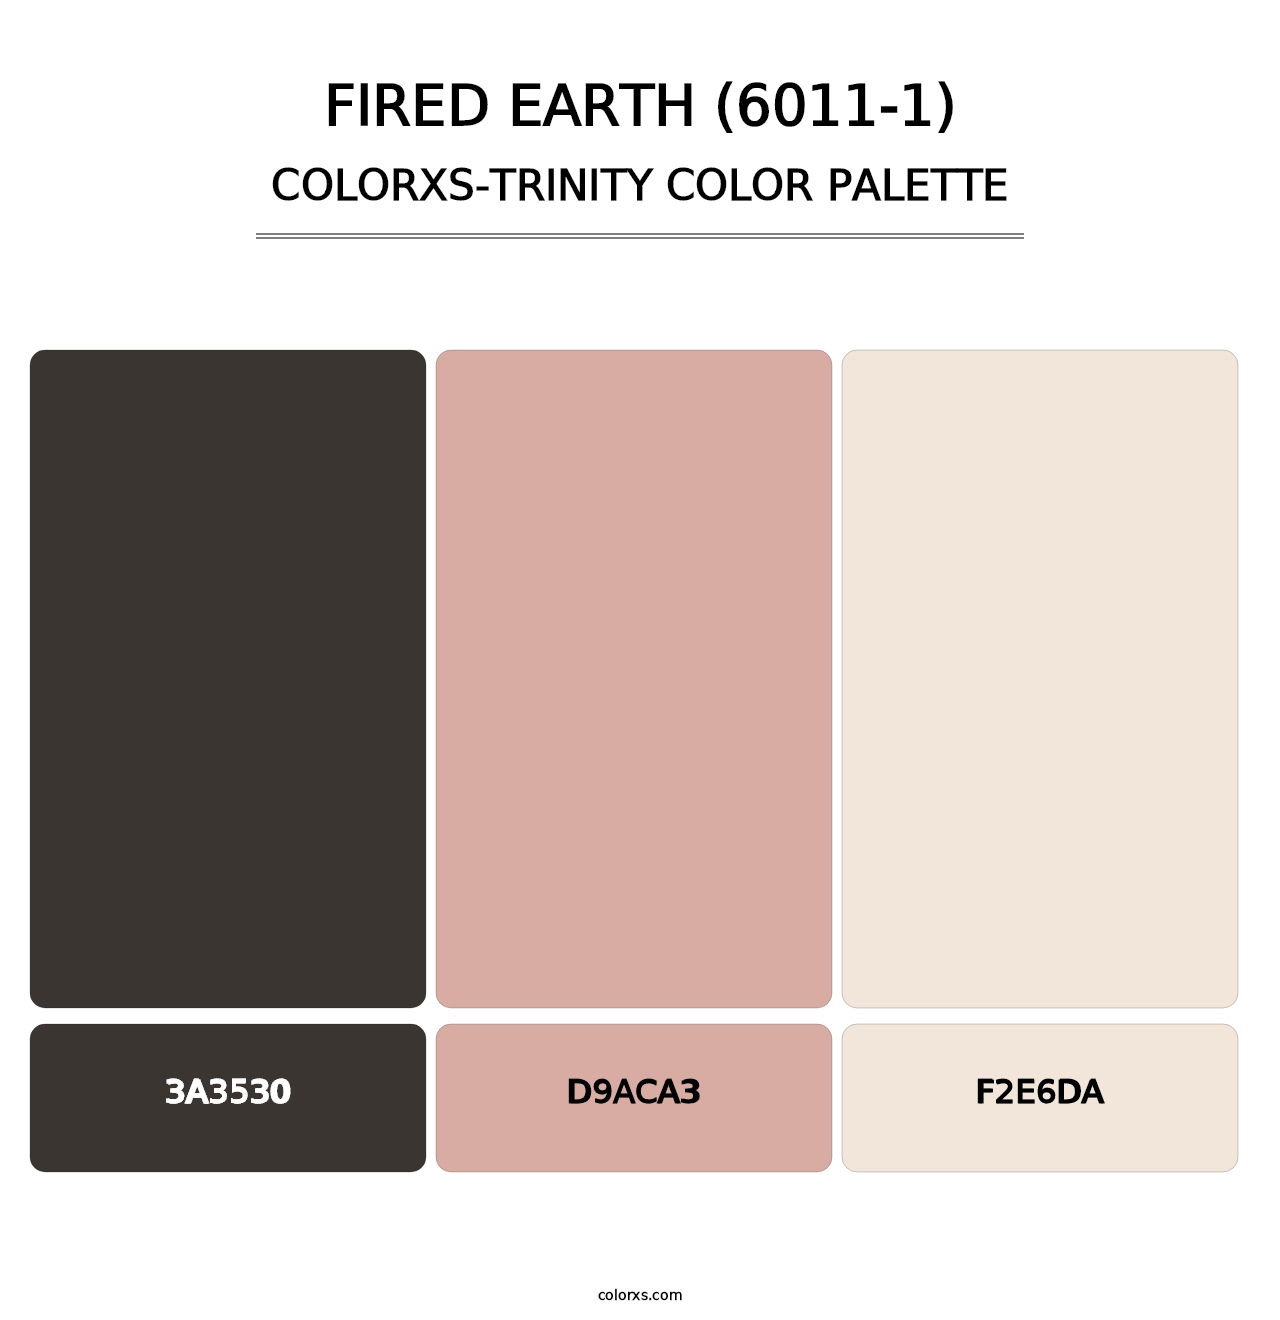 Fired Earth (6011-1) - Colorxs Trinity Palette